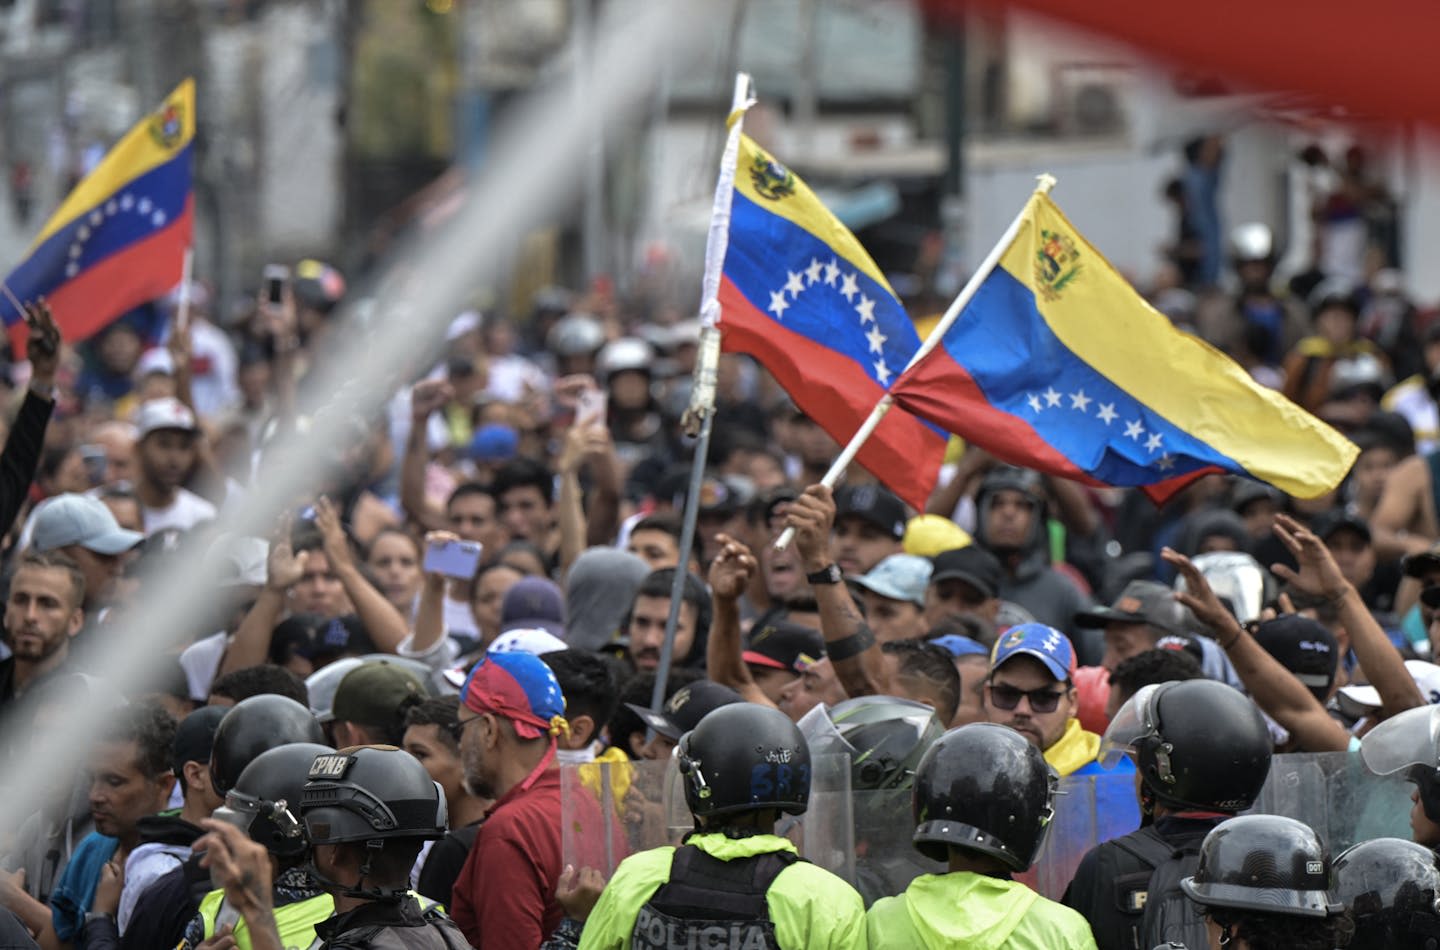 Massive protests erupt again over disputed Venezuelan elections – but they look different this time